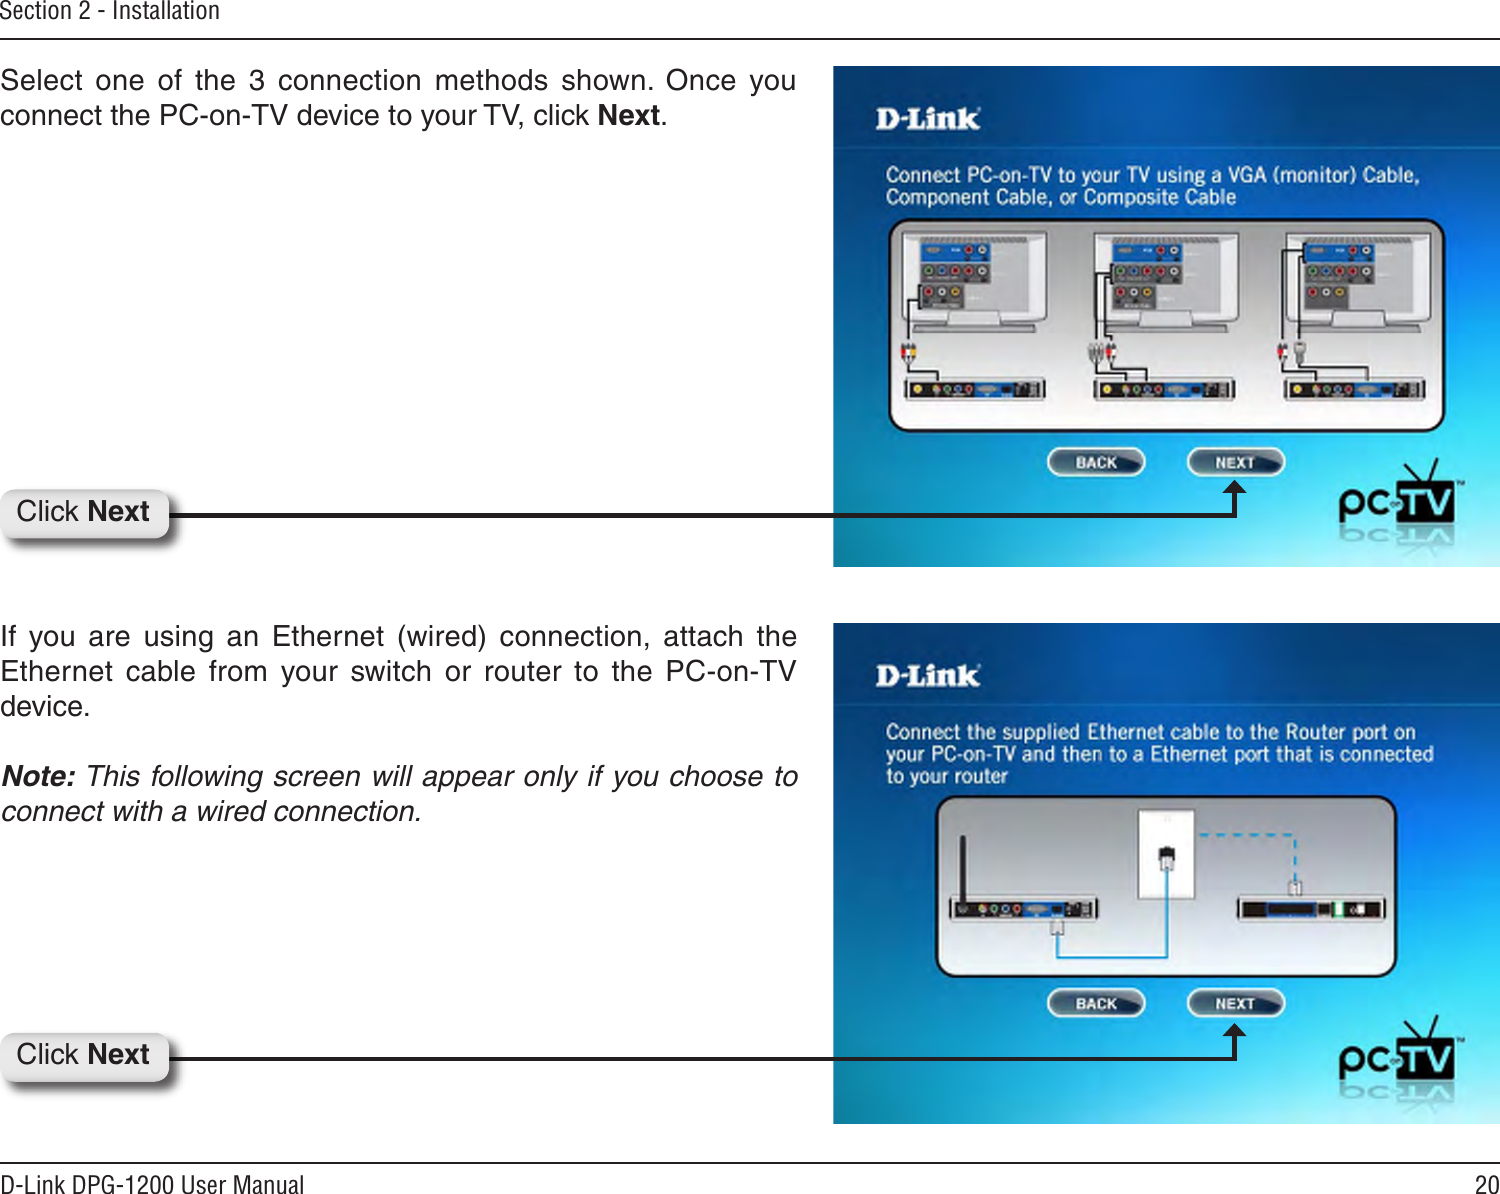 20D-Link DPG-1200 User ManualSection 2 - InstallationClick NextSelect  one  of  the  3  connection  methods  shown.  Once  you connect the PC-on-TV device to your TV, click Next.If  you  are  using  an  Ethernet  (wired)  connection,  attach  the Ethernet  cable  from  your  switch  or  router  to  the  PC-on-TV device.Note: This following screen will appear only if you choose to connect with a wired connection.Click Next